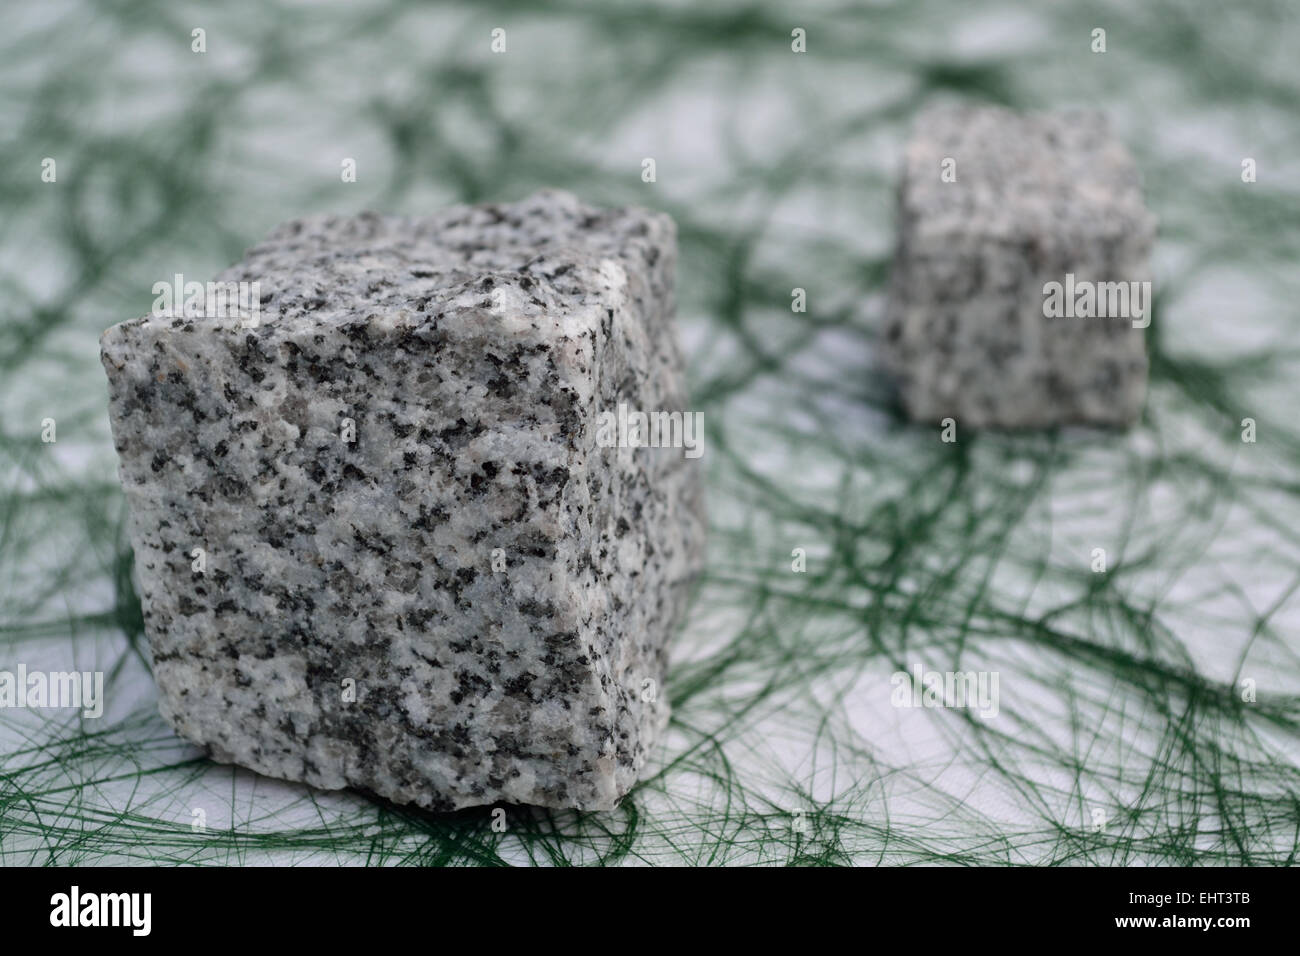 Natural stones on a green tablecloth Stock Photo